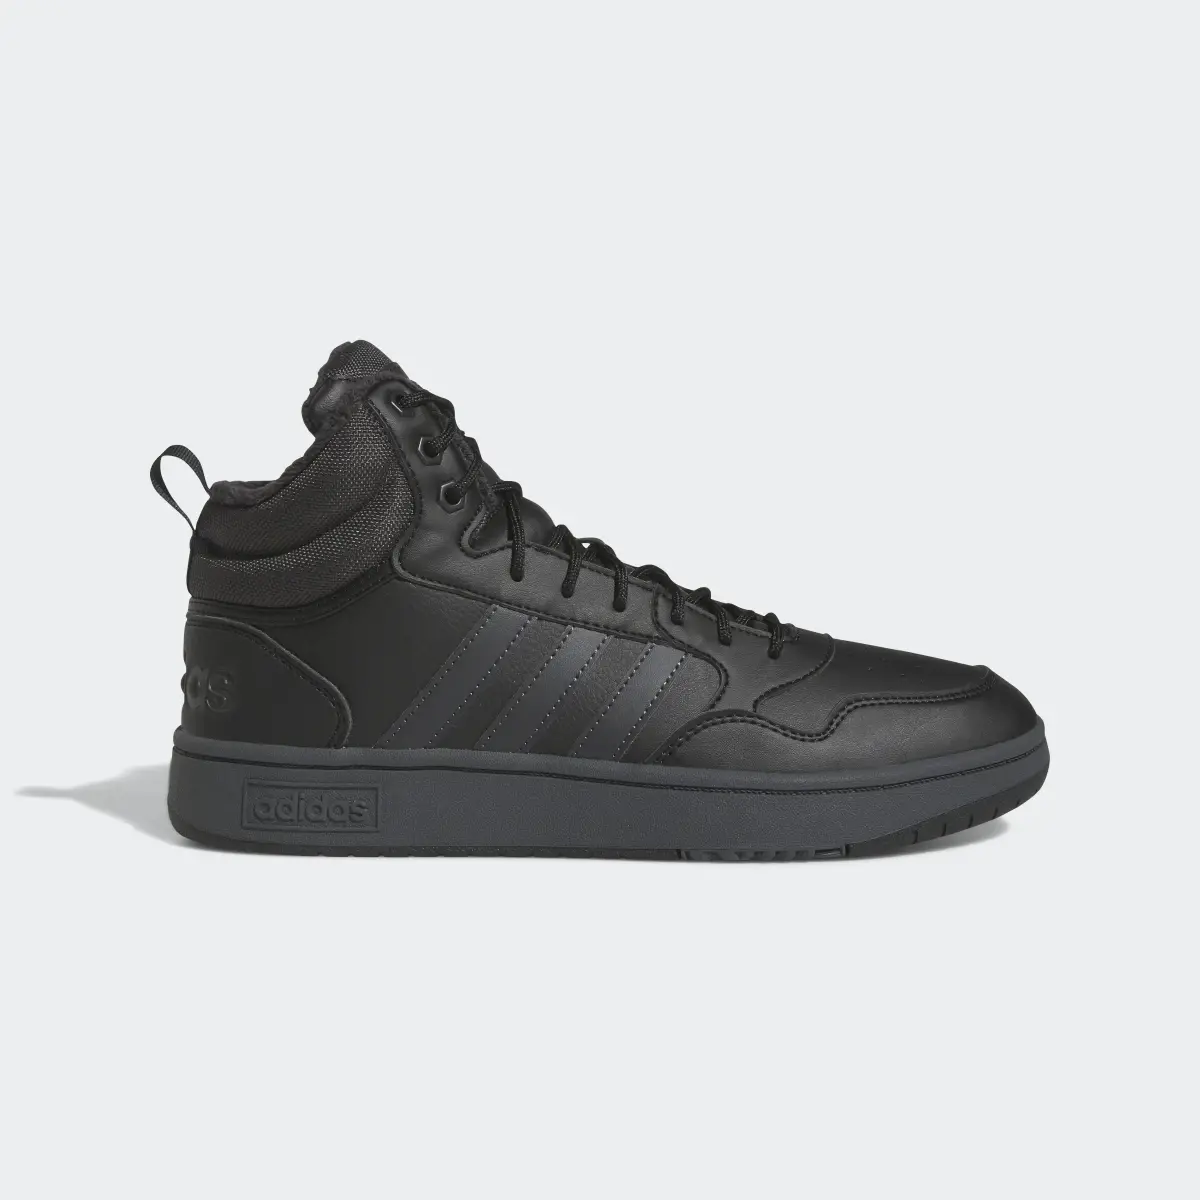 Adidas Chaussure Hoops 3.0 Mid Lifestyle Basketball Classic Fur Lining Winterized. 2